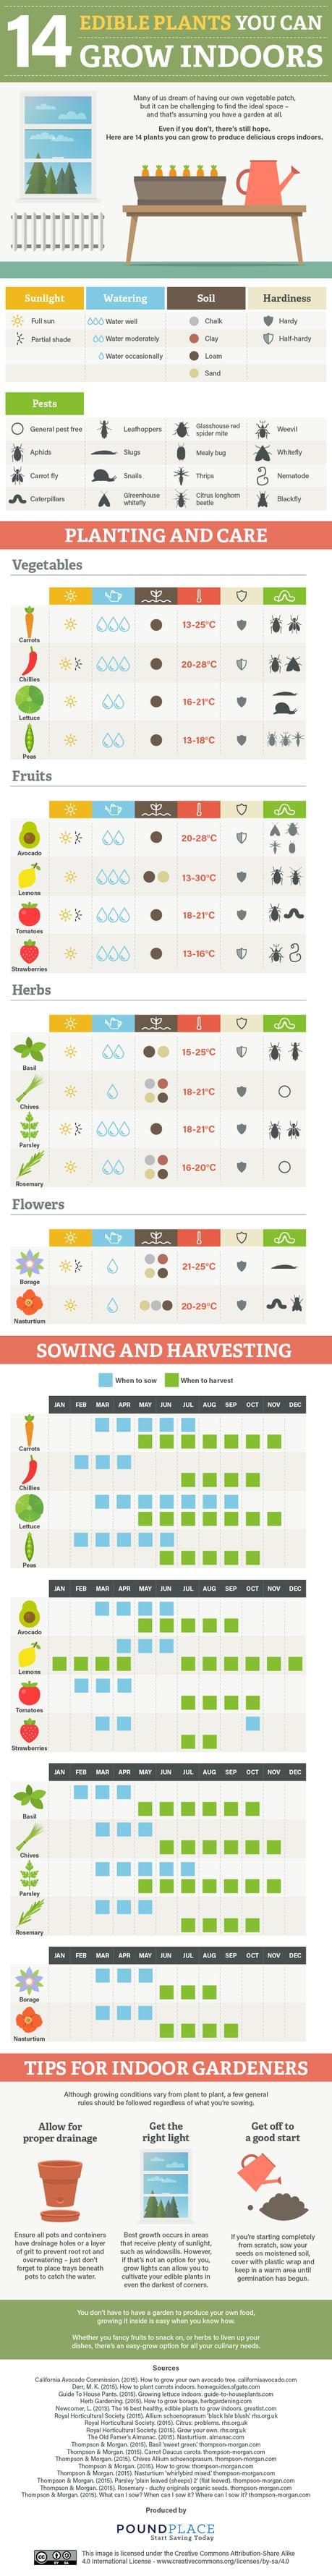 14 Edible Plants You Can Grow Indoors - infographic